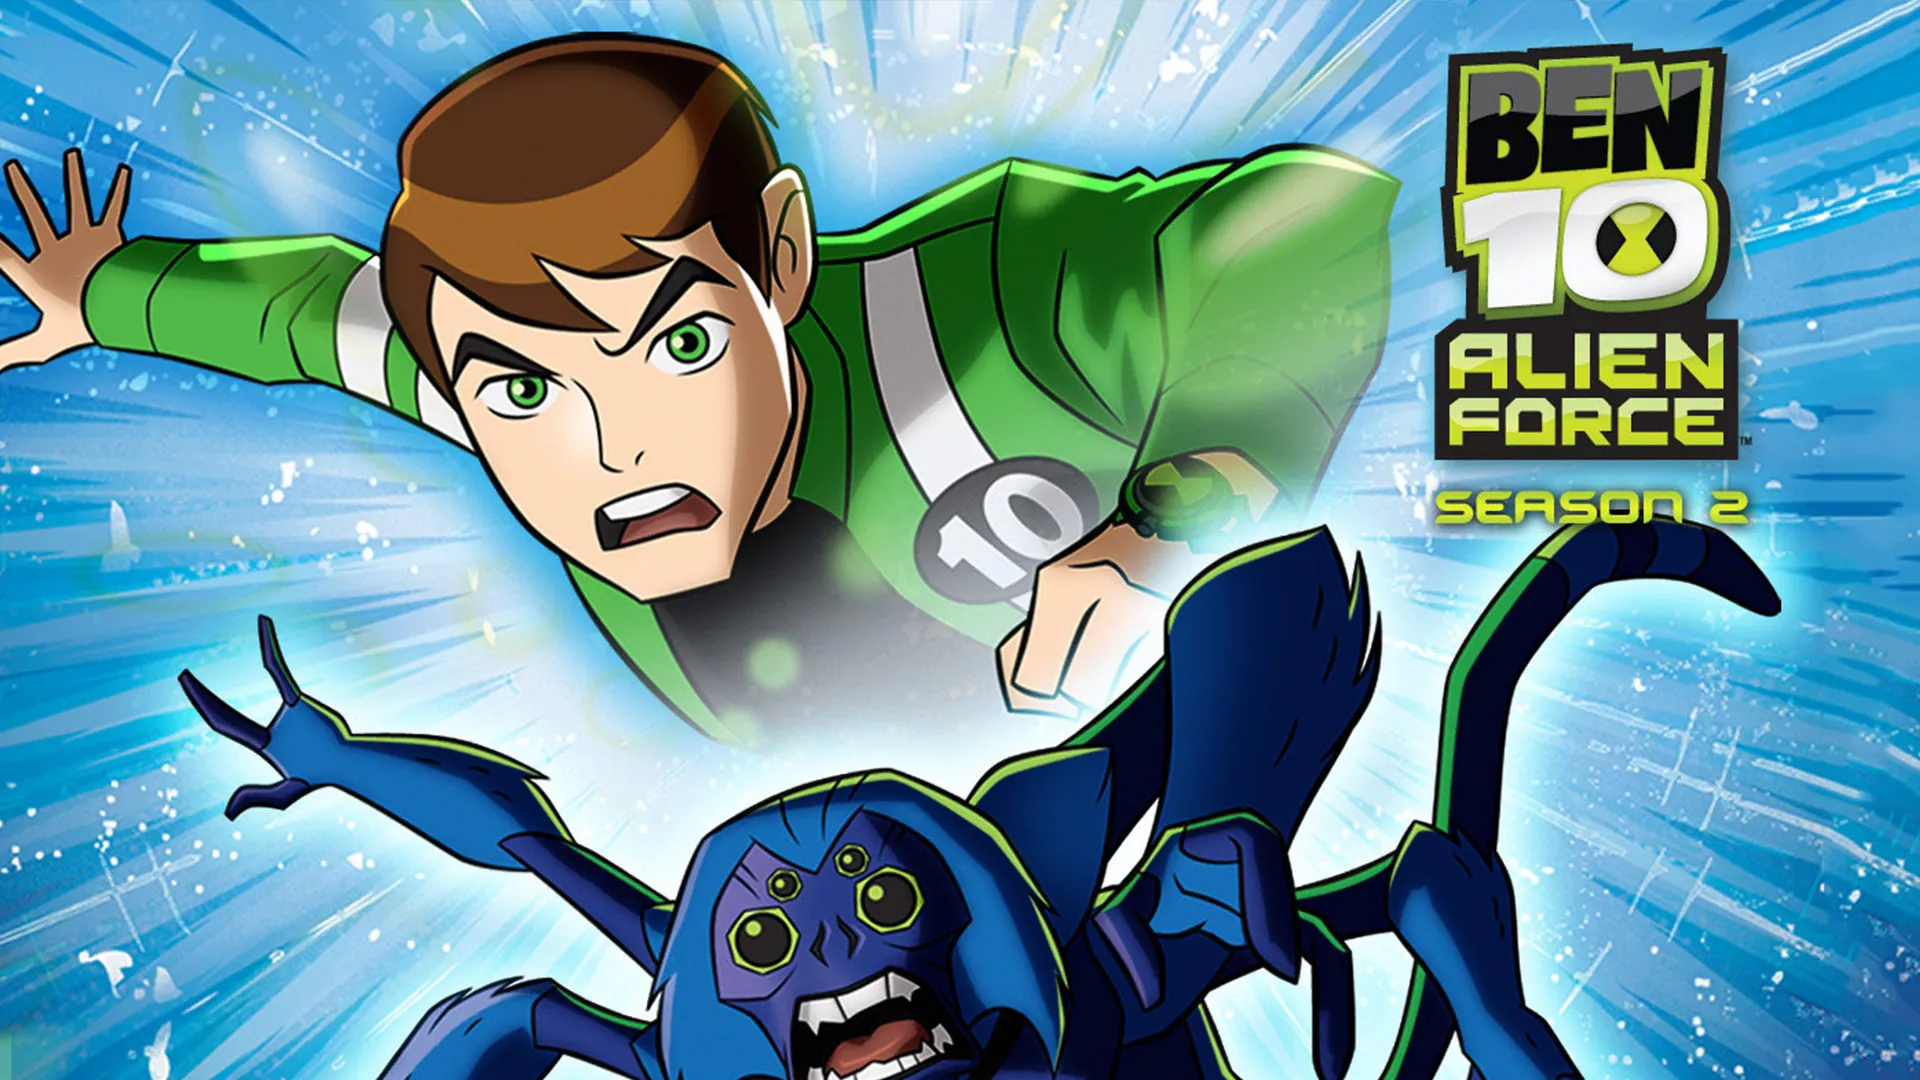 Ben 10 Alien Force Season 2 Hindi Episodes Download in FHD Rare Toons India